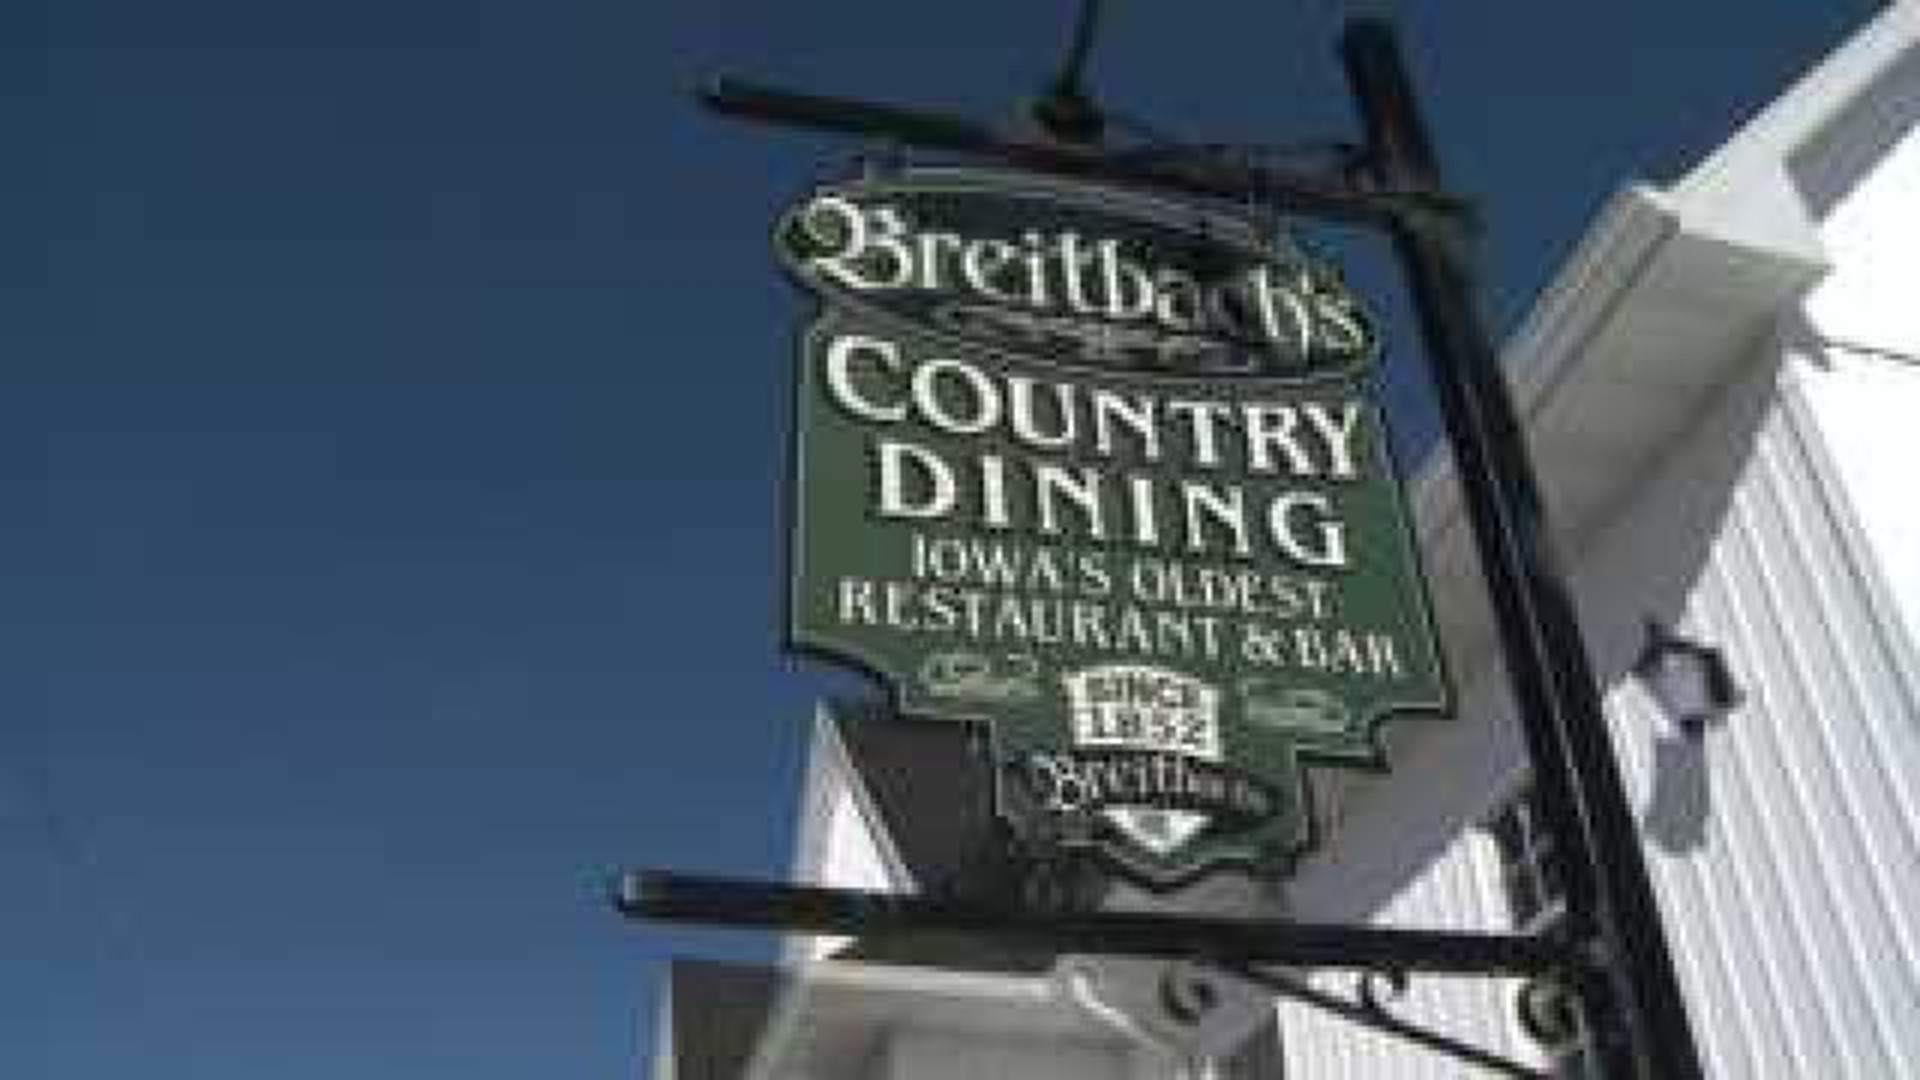 Breitbach Country Dining